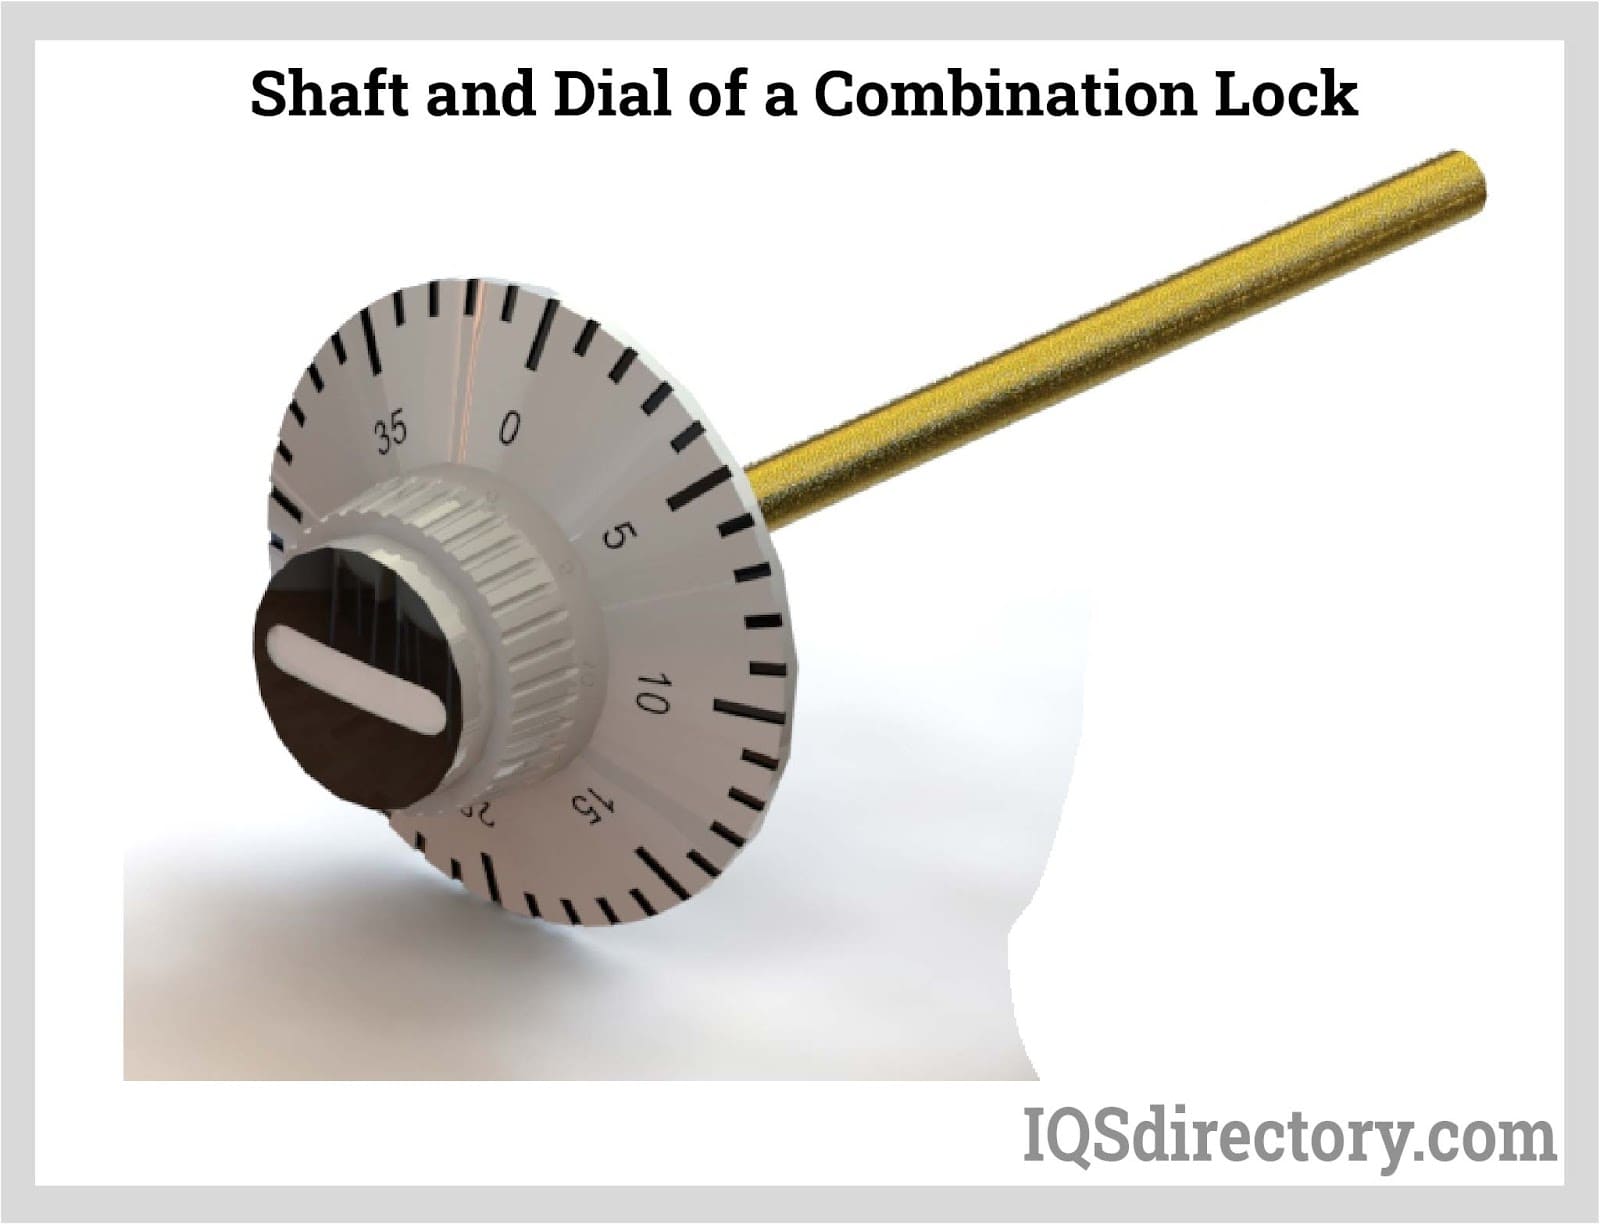 Shaft and Dial of a Combination Lock